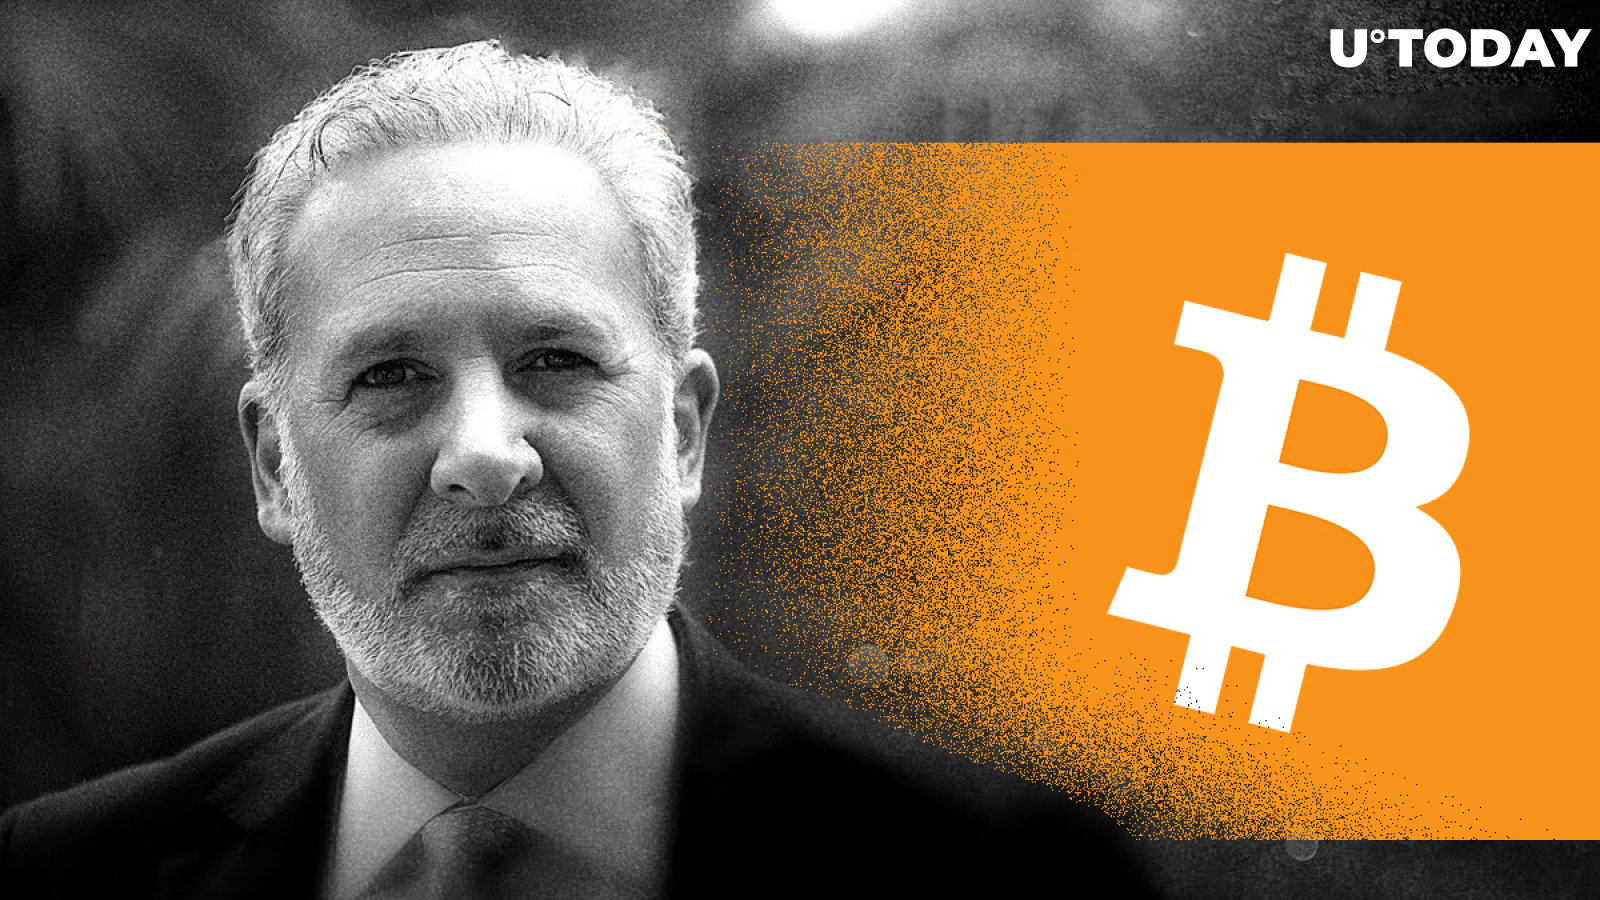 Bitcoin Still 40% Below the 2019 High, While Gold is in Bull Market: Peter Schiff